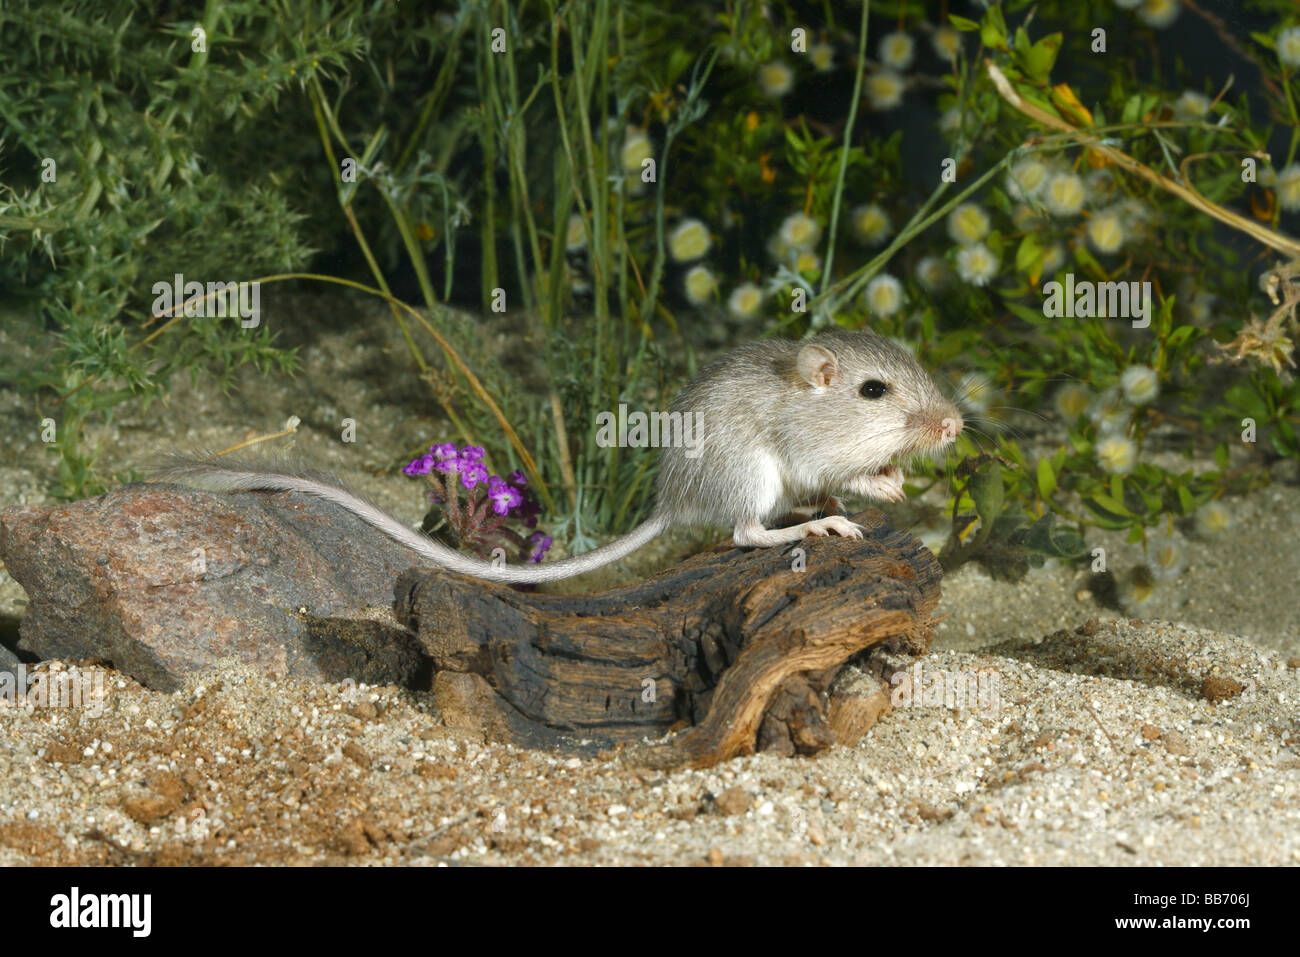 Long-tailed Pocket Mouse Stock Photo